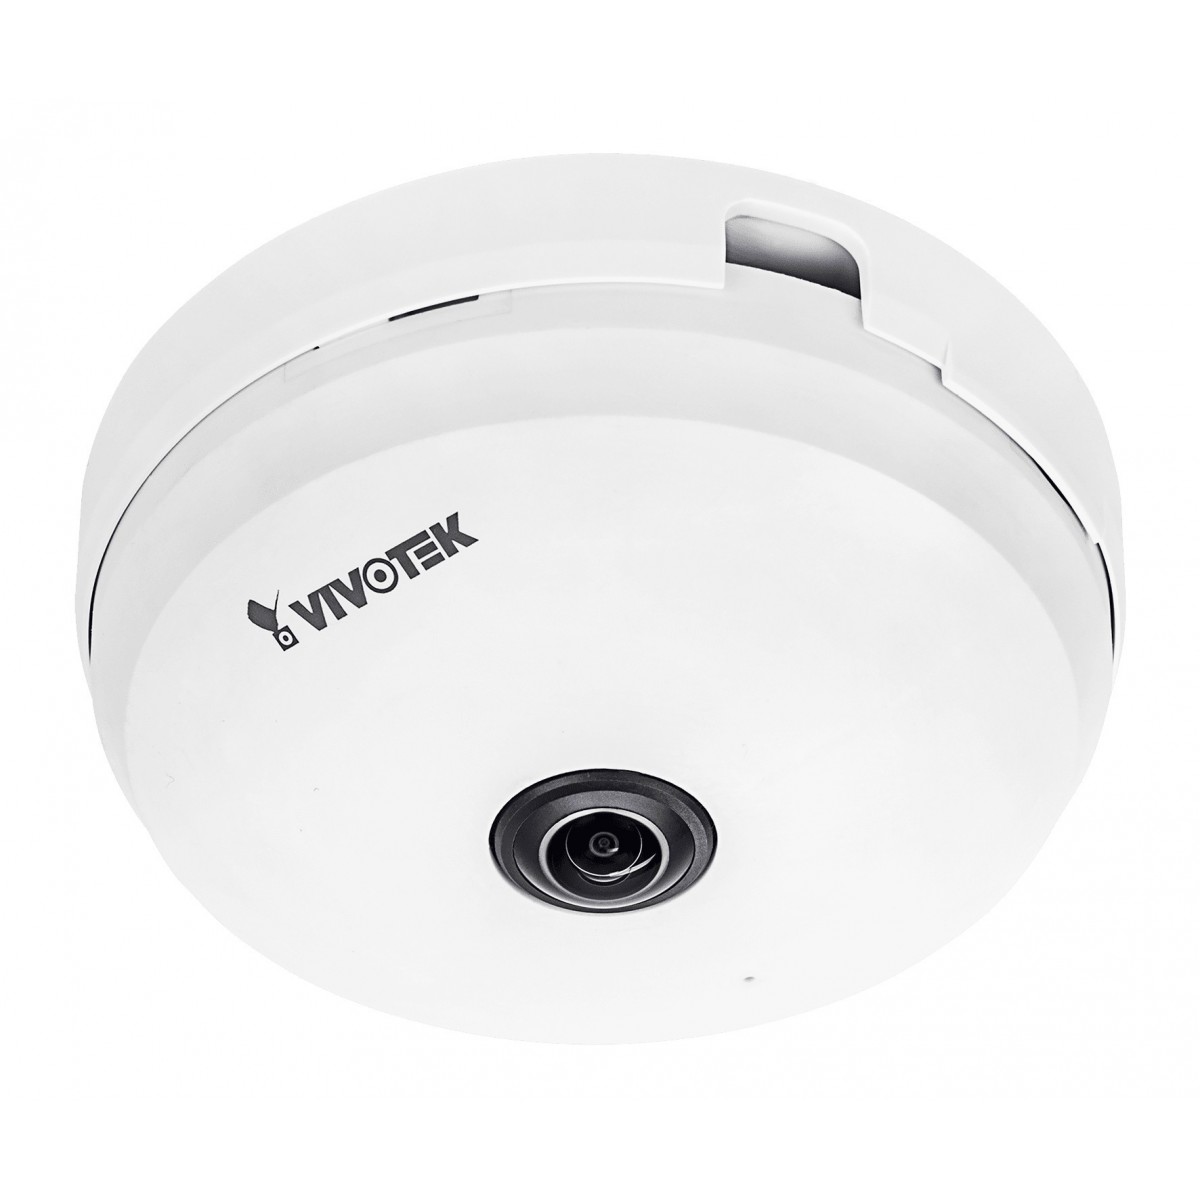 VIVOTEK FE9180-H - IP security camera - Indoor - Wired - CE - LVD - FCC Class B - VCCI - C-Tick - UL - Ceiling - White